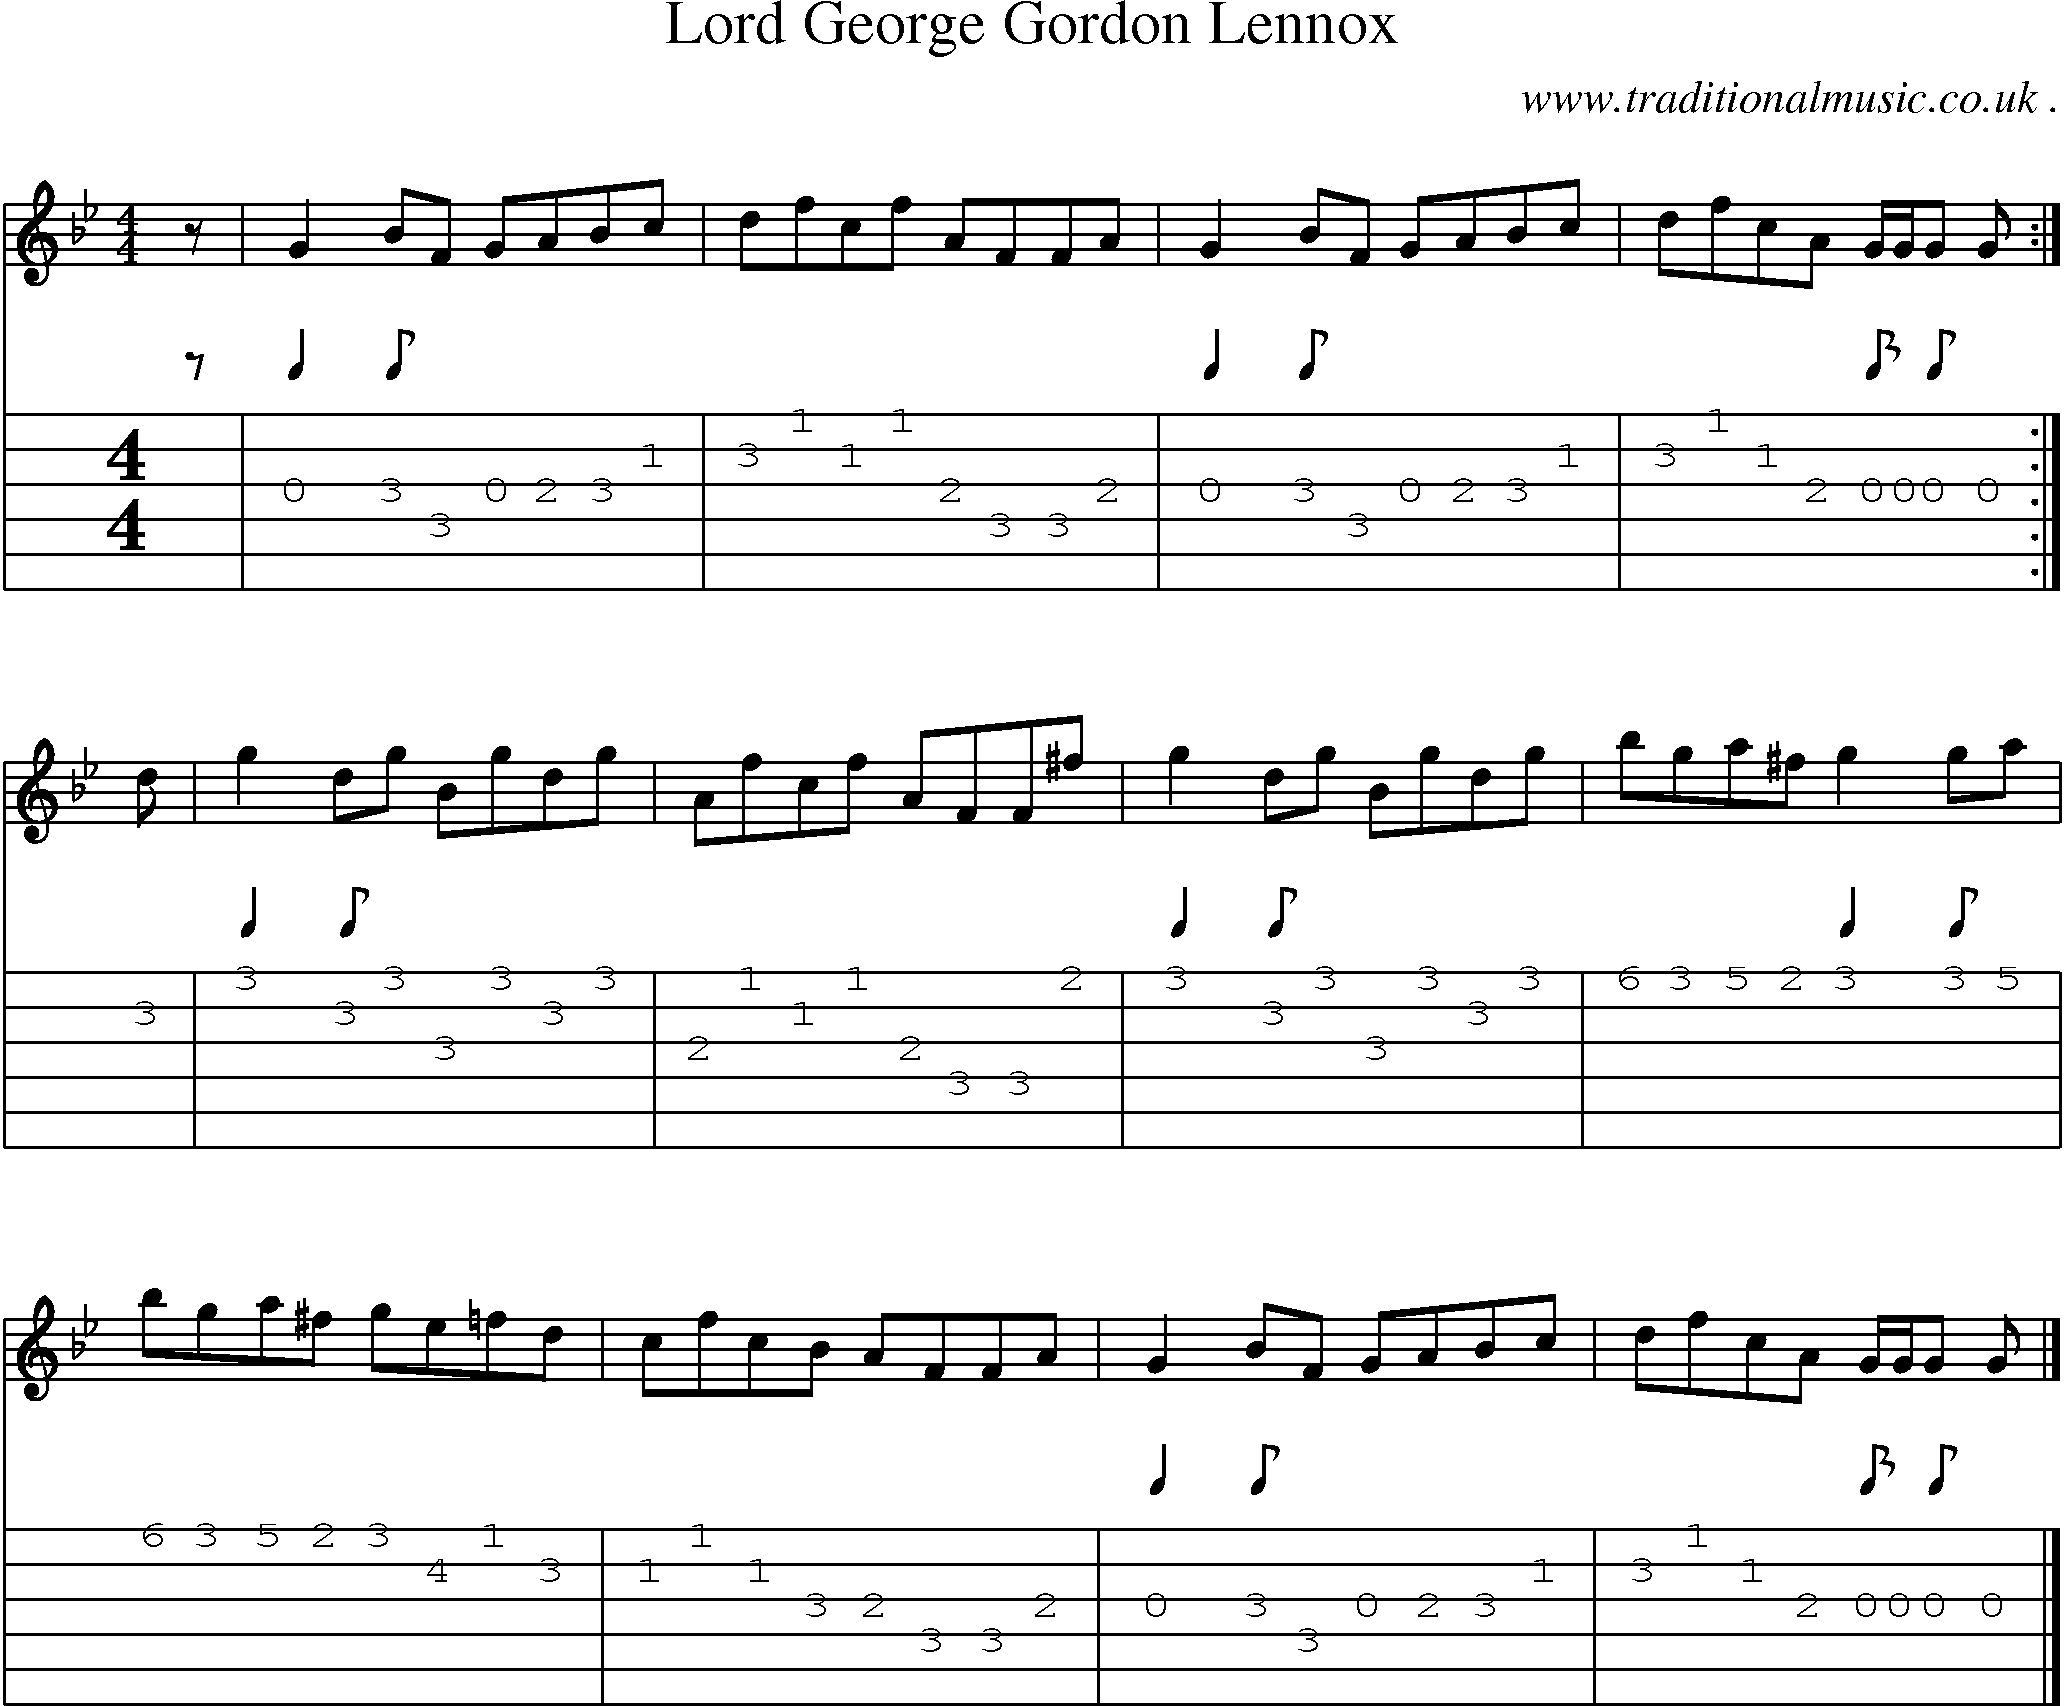 Sheet-music  score, Chords and Guitar Tabs for Lord George Gordon Lennox